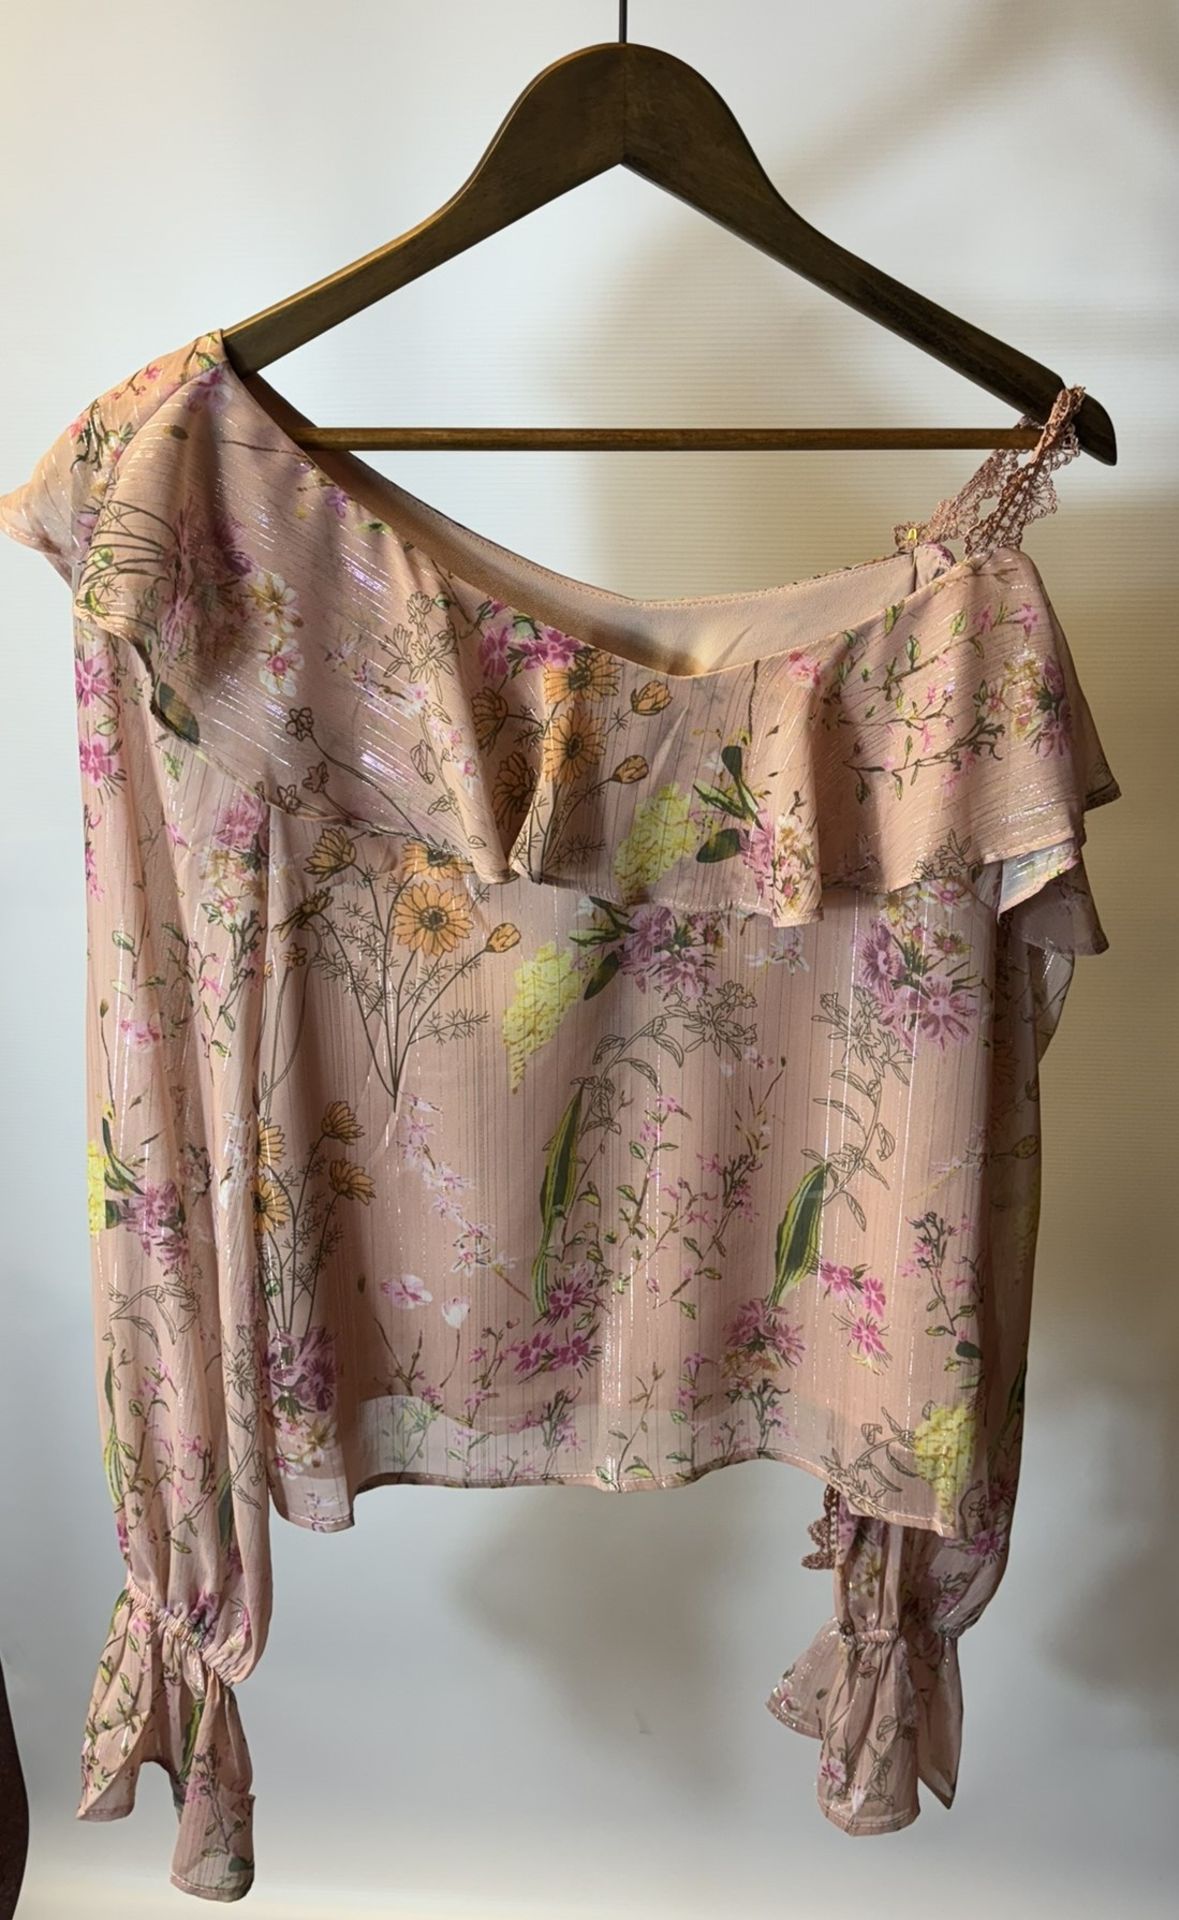 15 x Various Women's Tops/Blouses/Shirts As Seen In Photos - Image 19 of 45